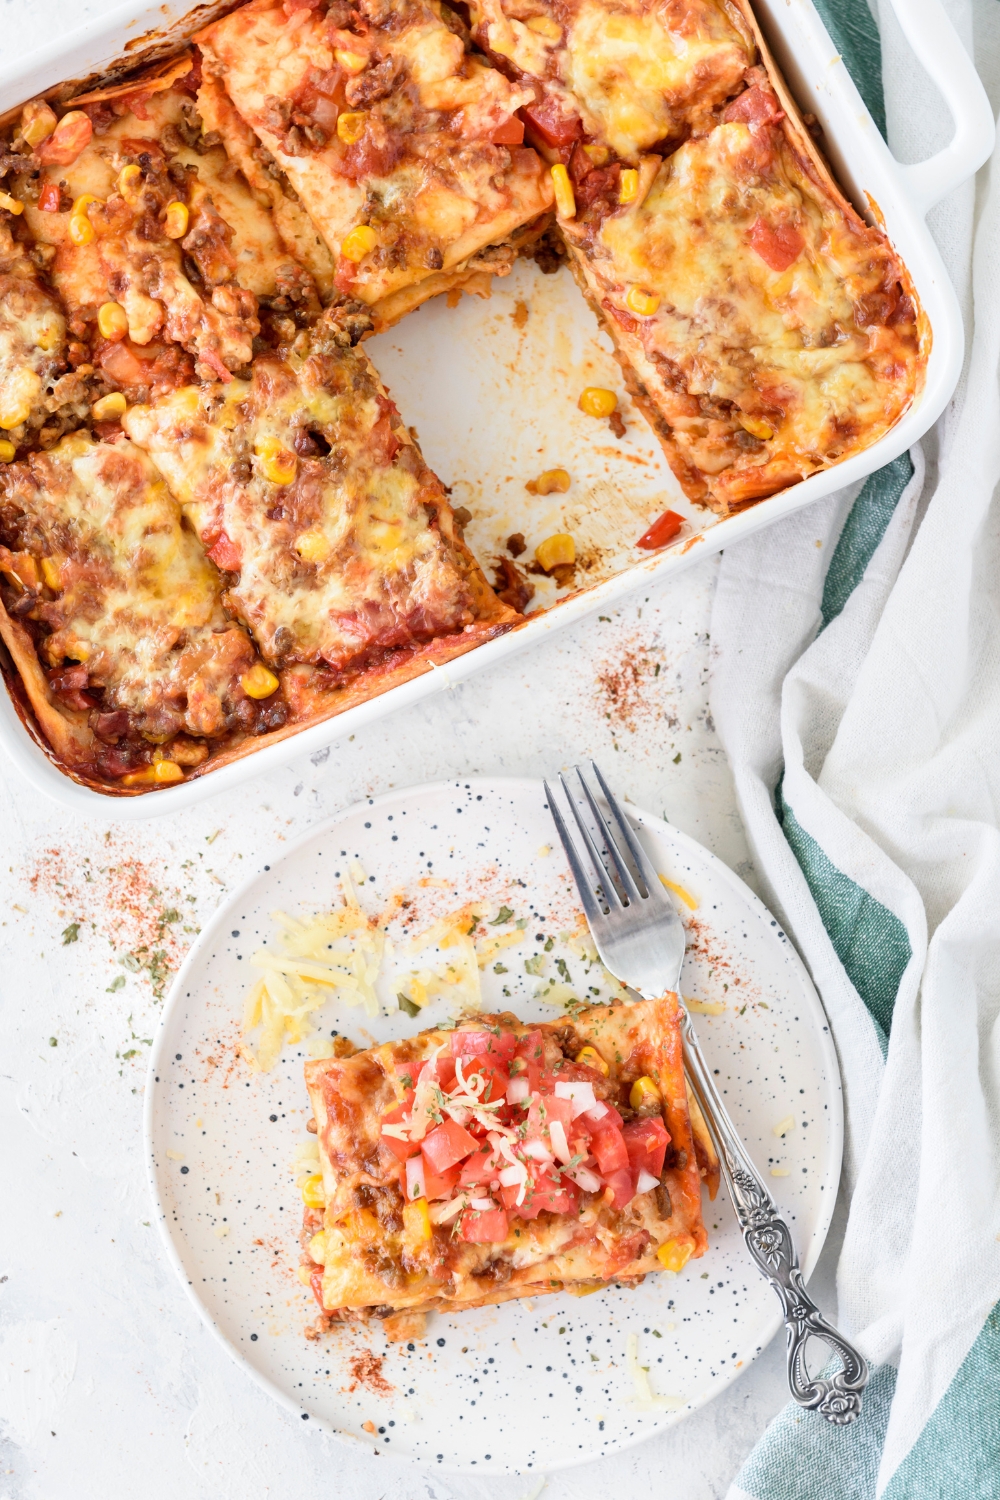 A square serving of casserole topped with melted cheese and salsa next to a baking dish filled with more casserole.